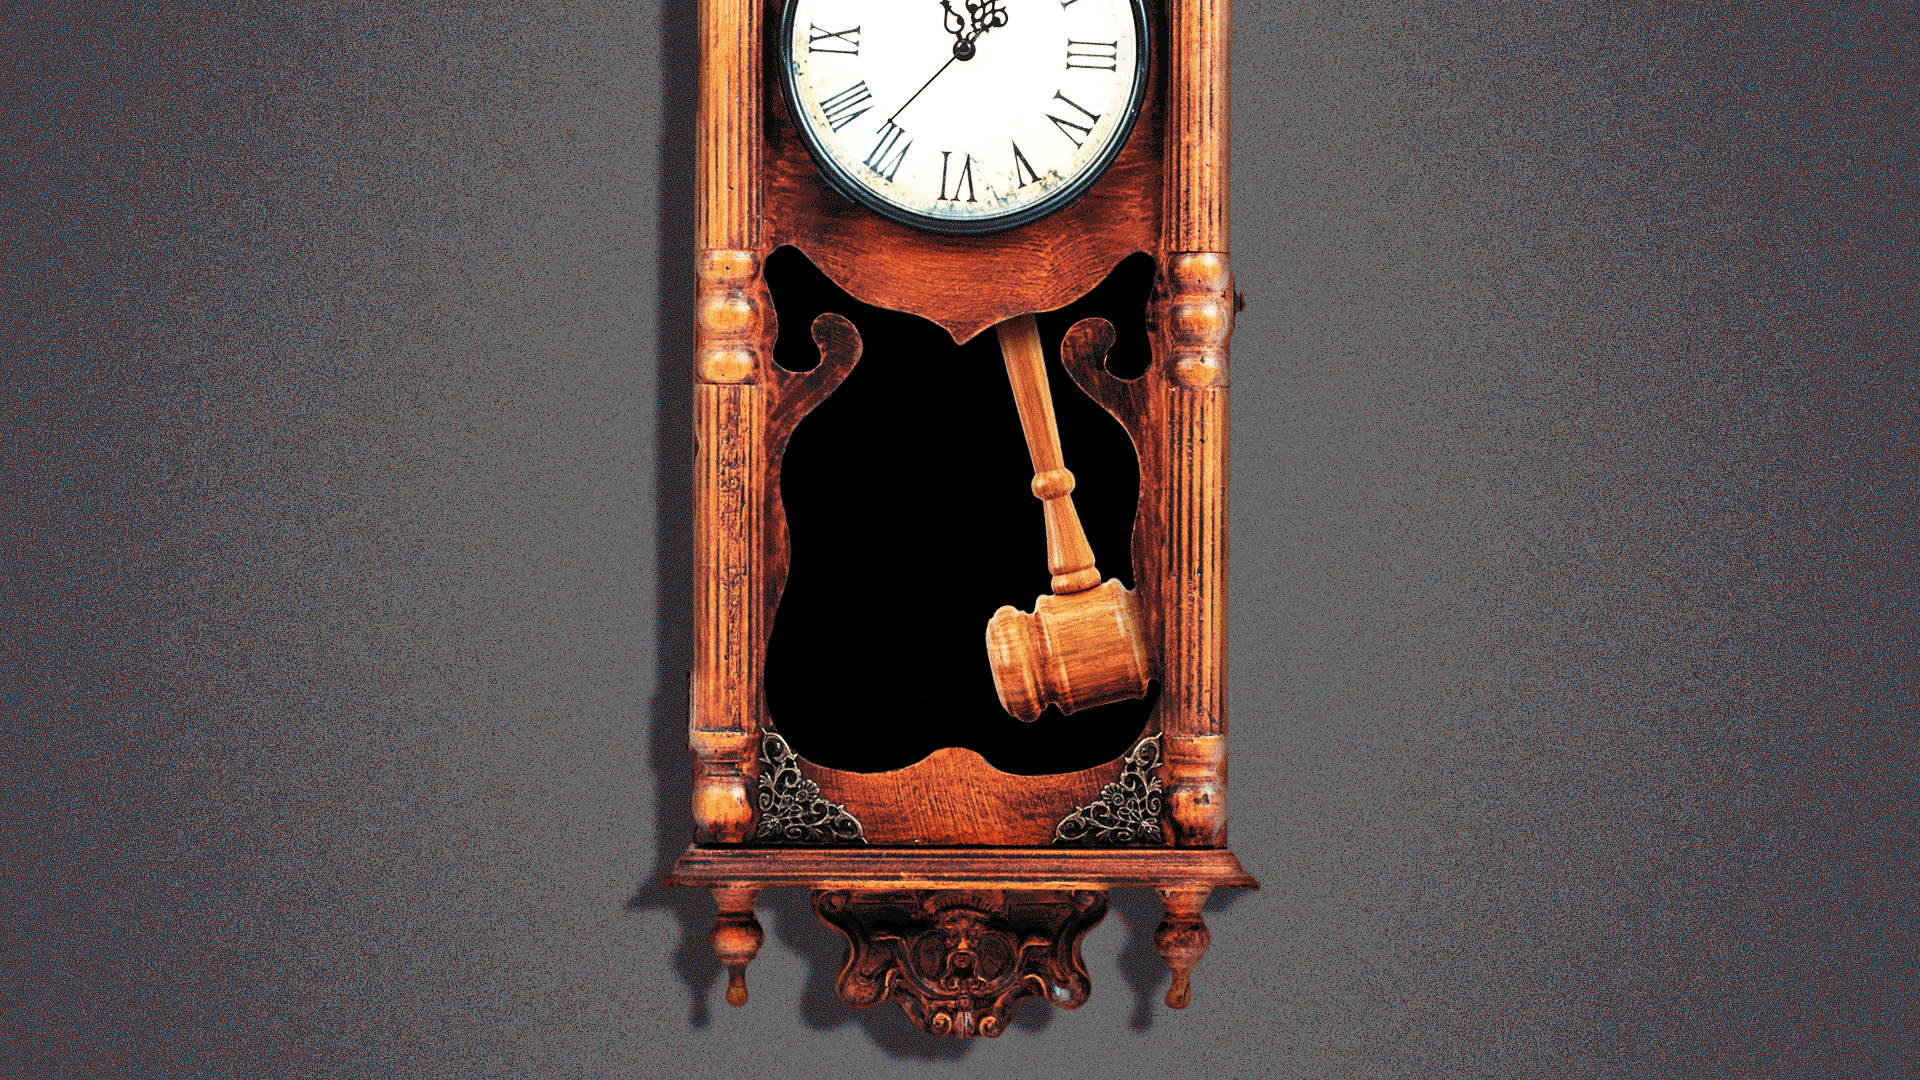 Animated illustration of a gavel replacing the pendulum inside a grandfather clock.